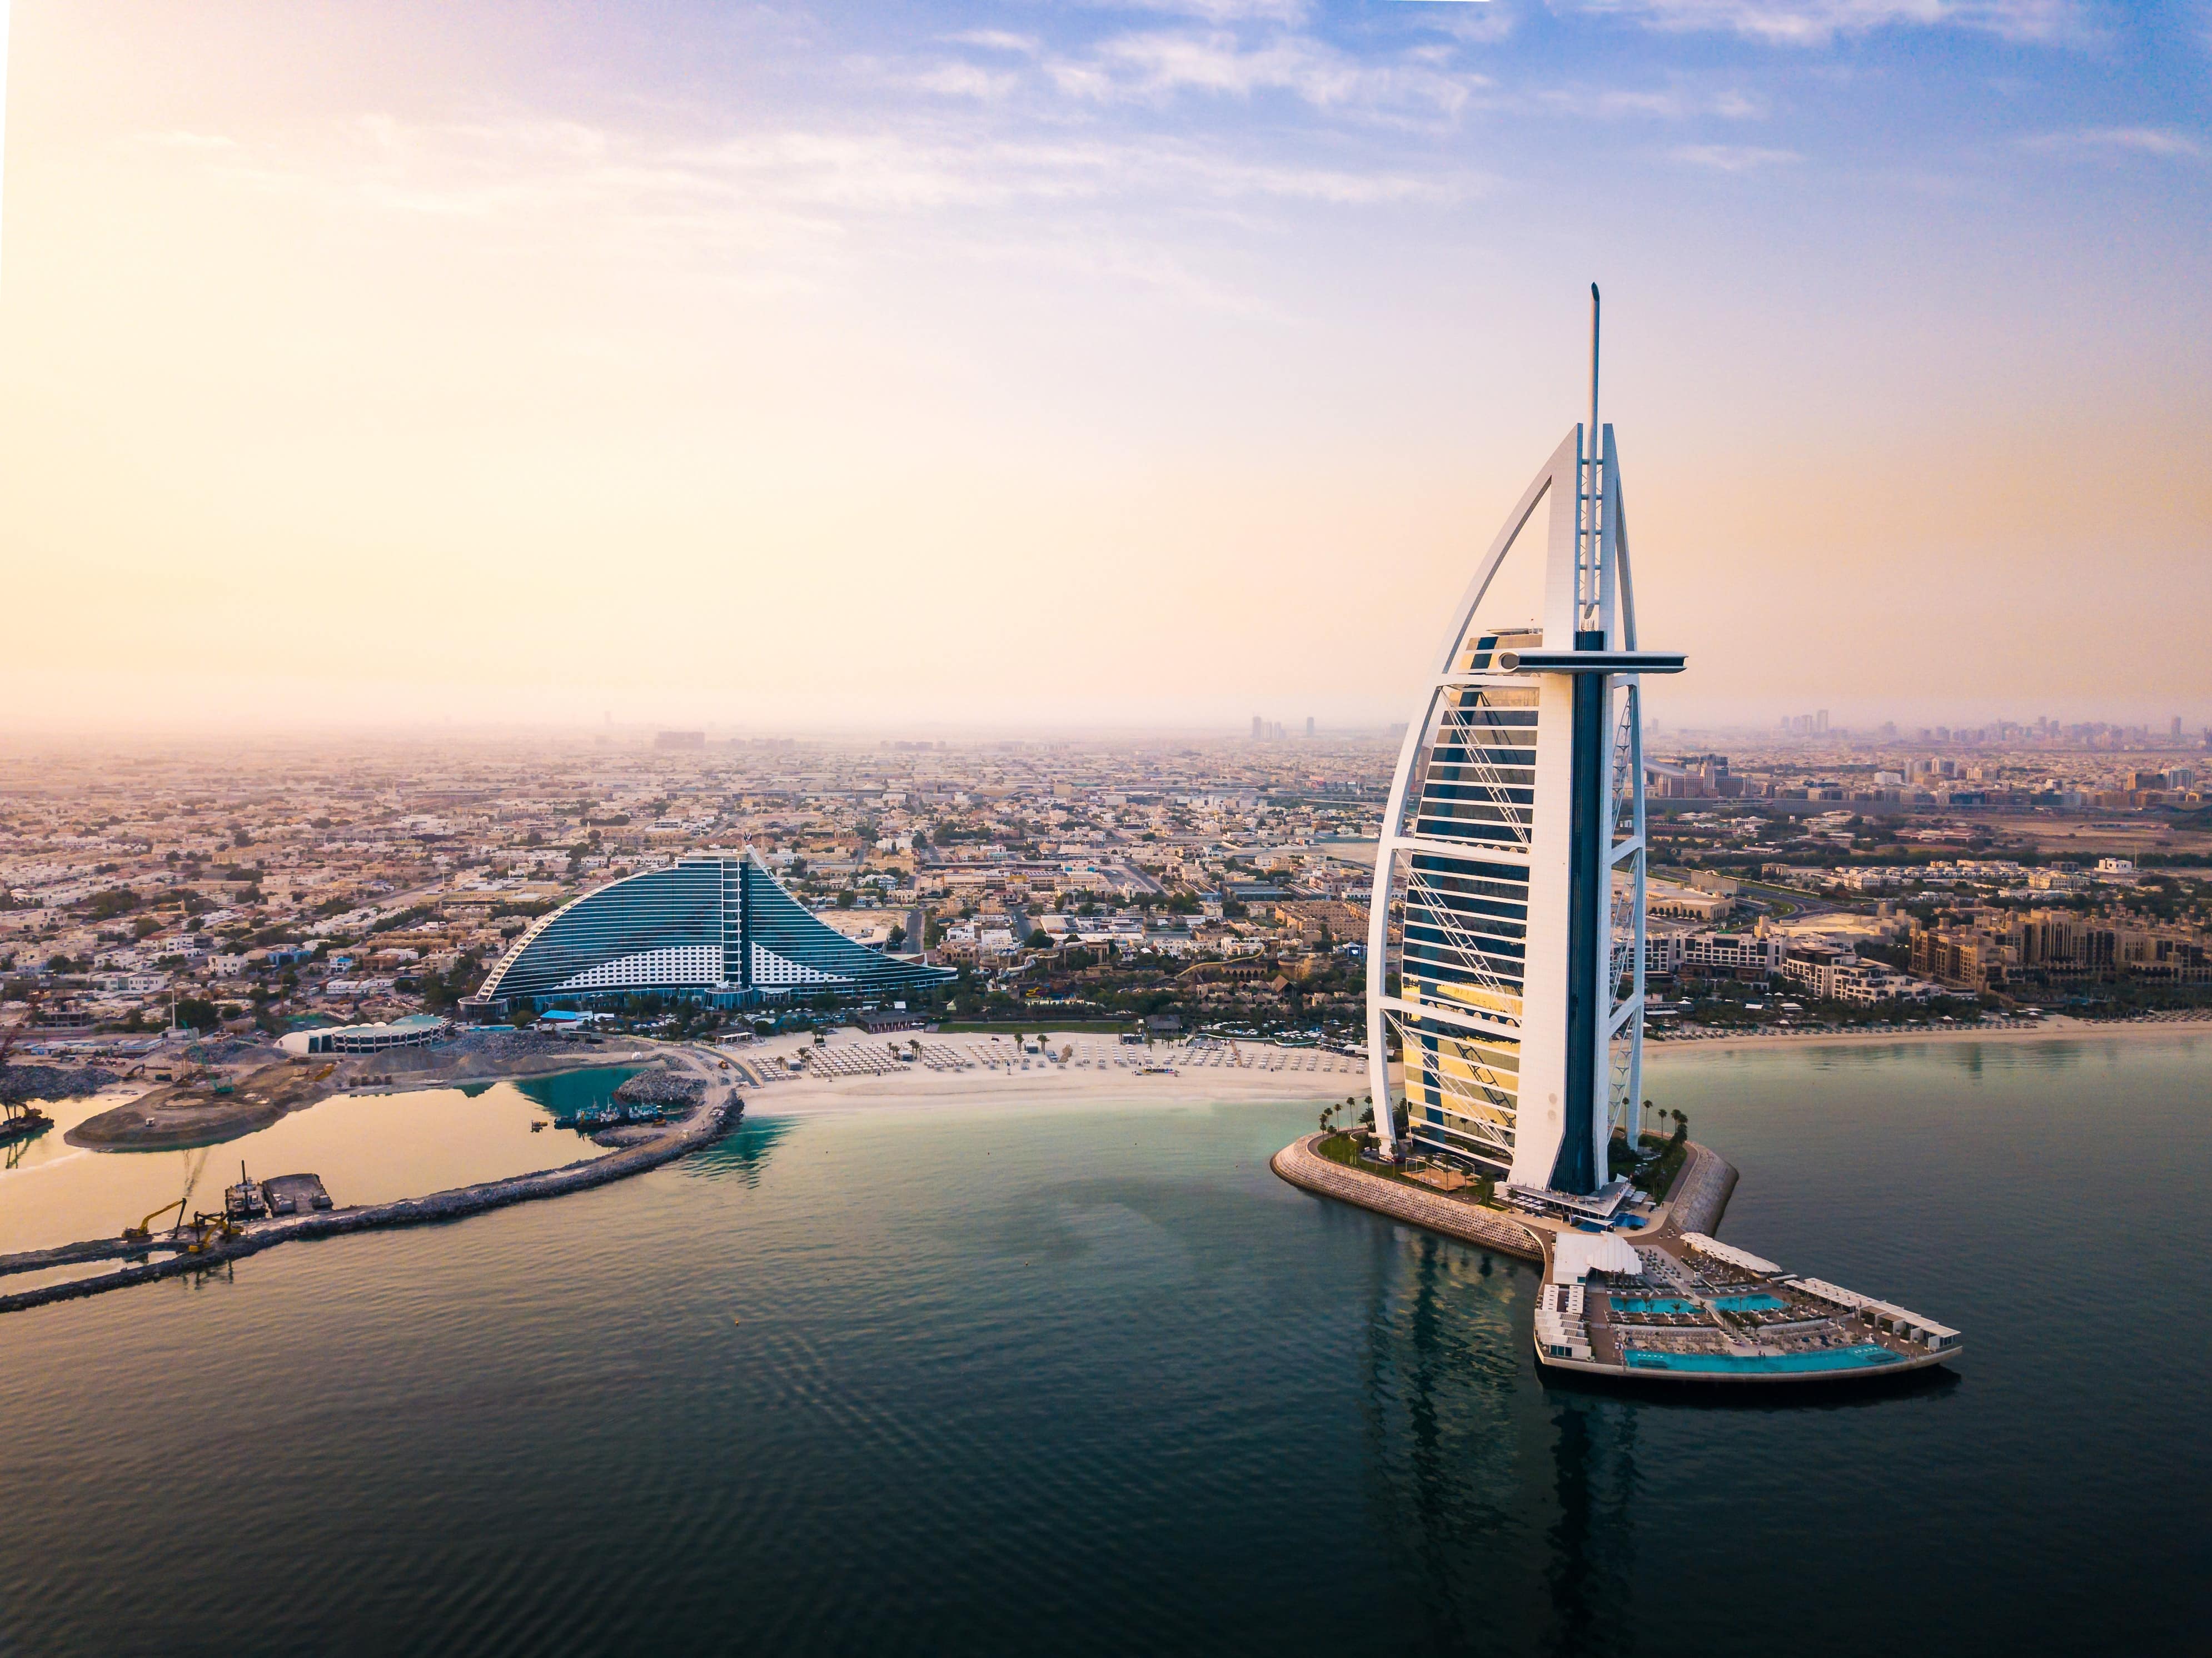 Dubai is getting even closer with SkyUp: 120 tickets at a promotional rate